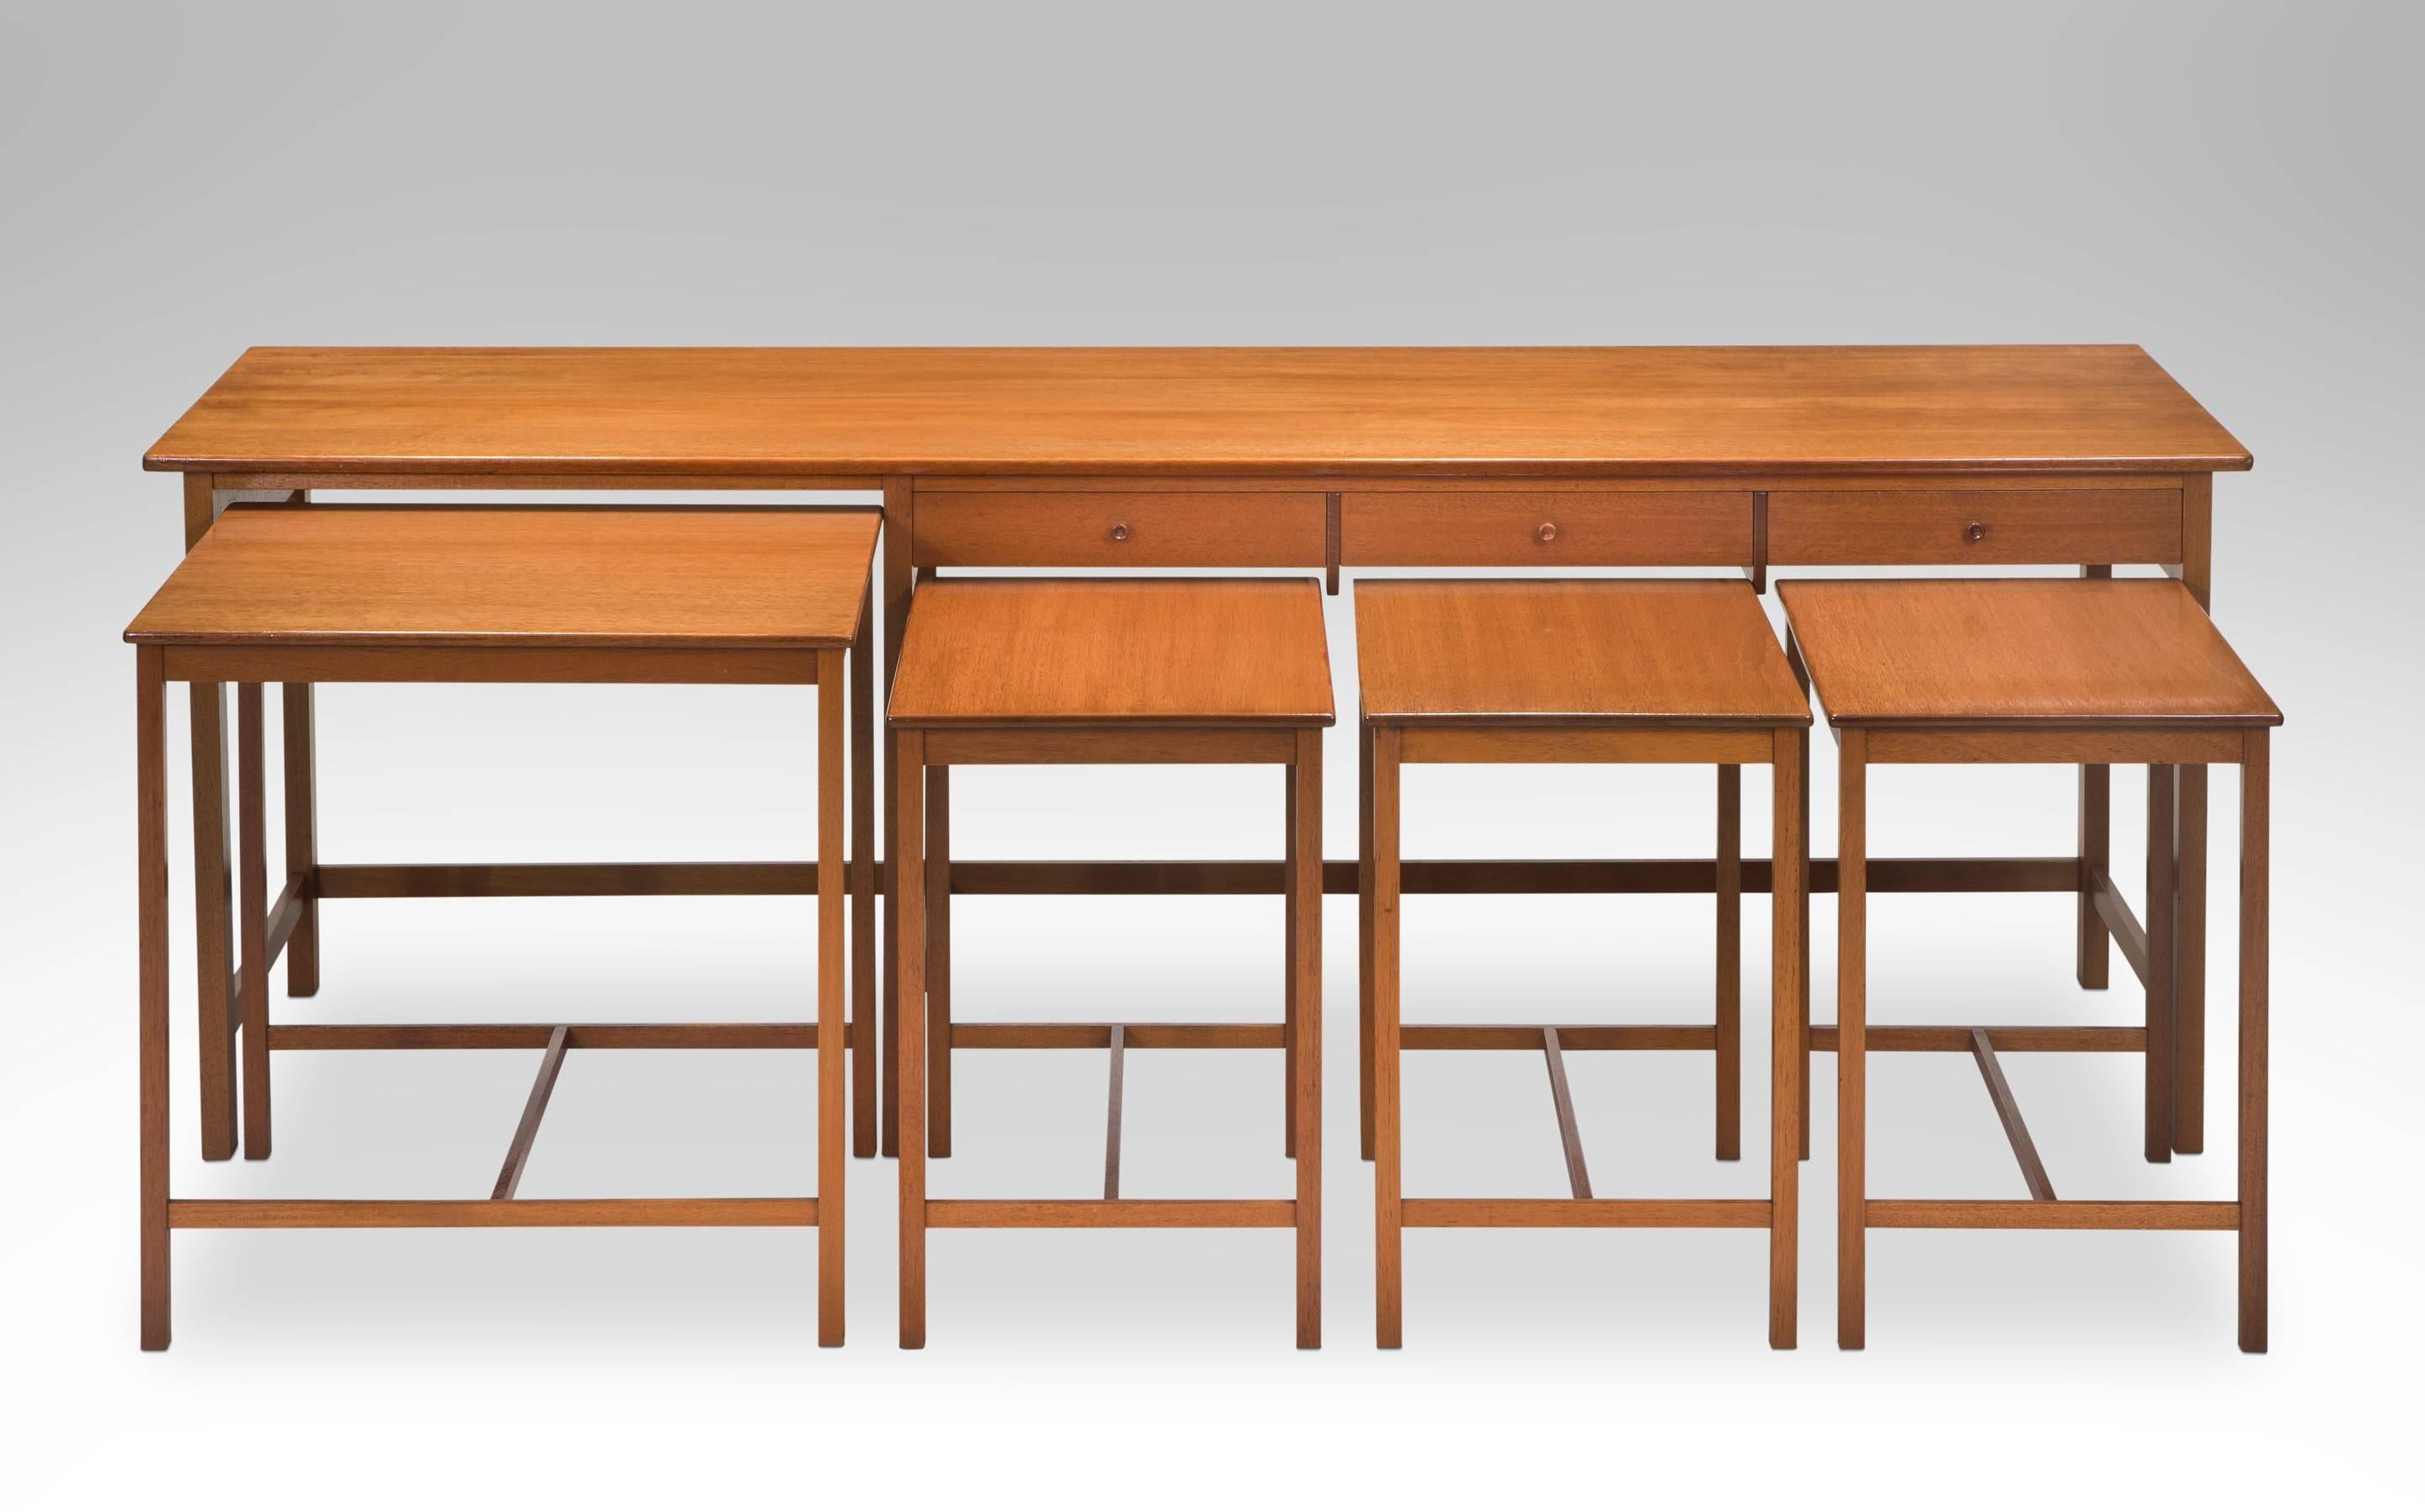 A deftly executed and innovative design for its time. The simple, lightweight construction is a precursor to later 20th century trends. The rectangular top with rounded ends, above a three drawer frieze, each drawer centering a small handmade wooden